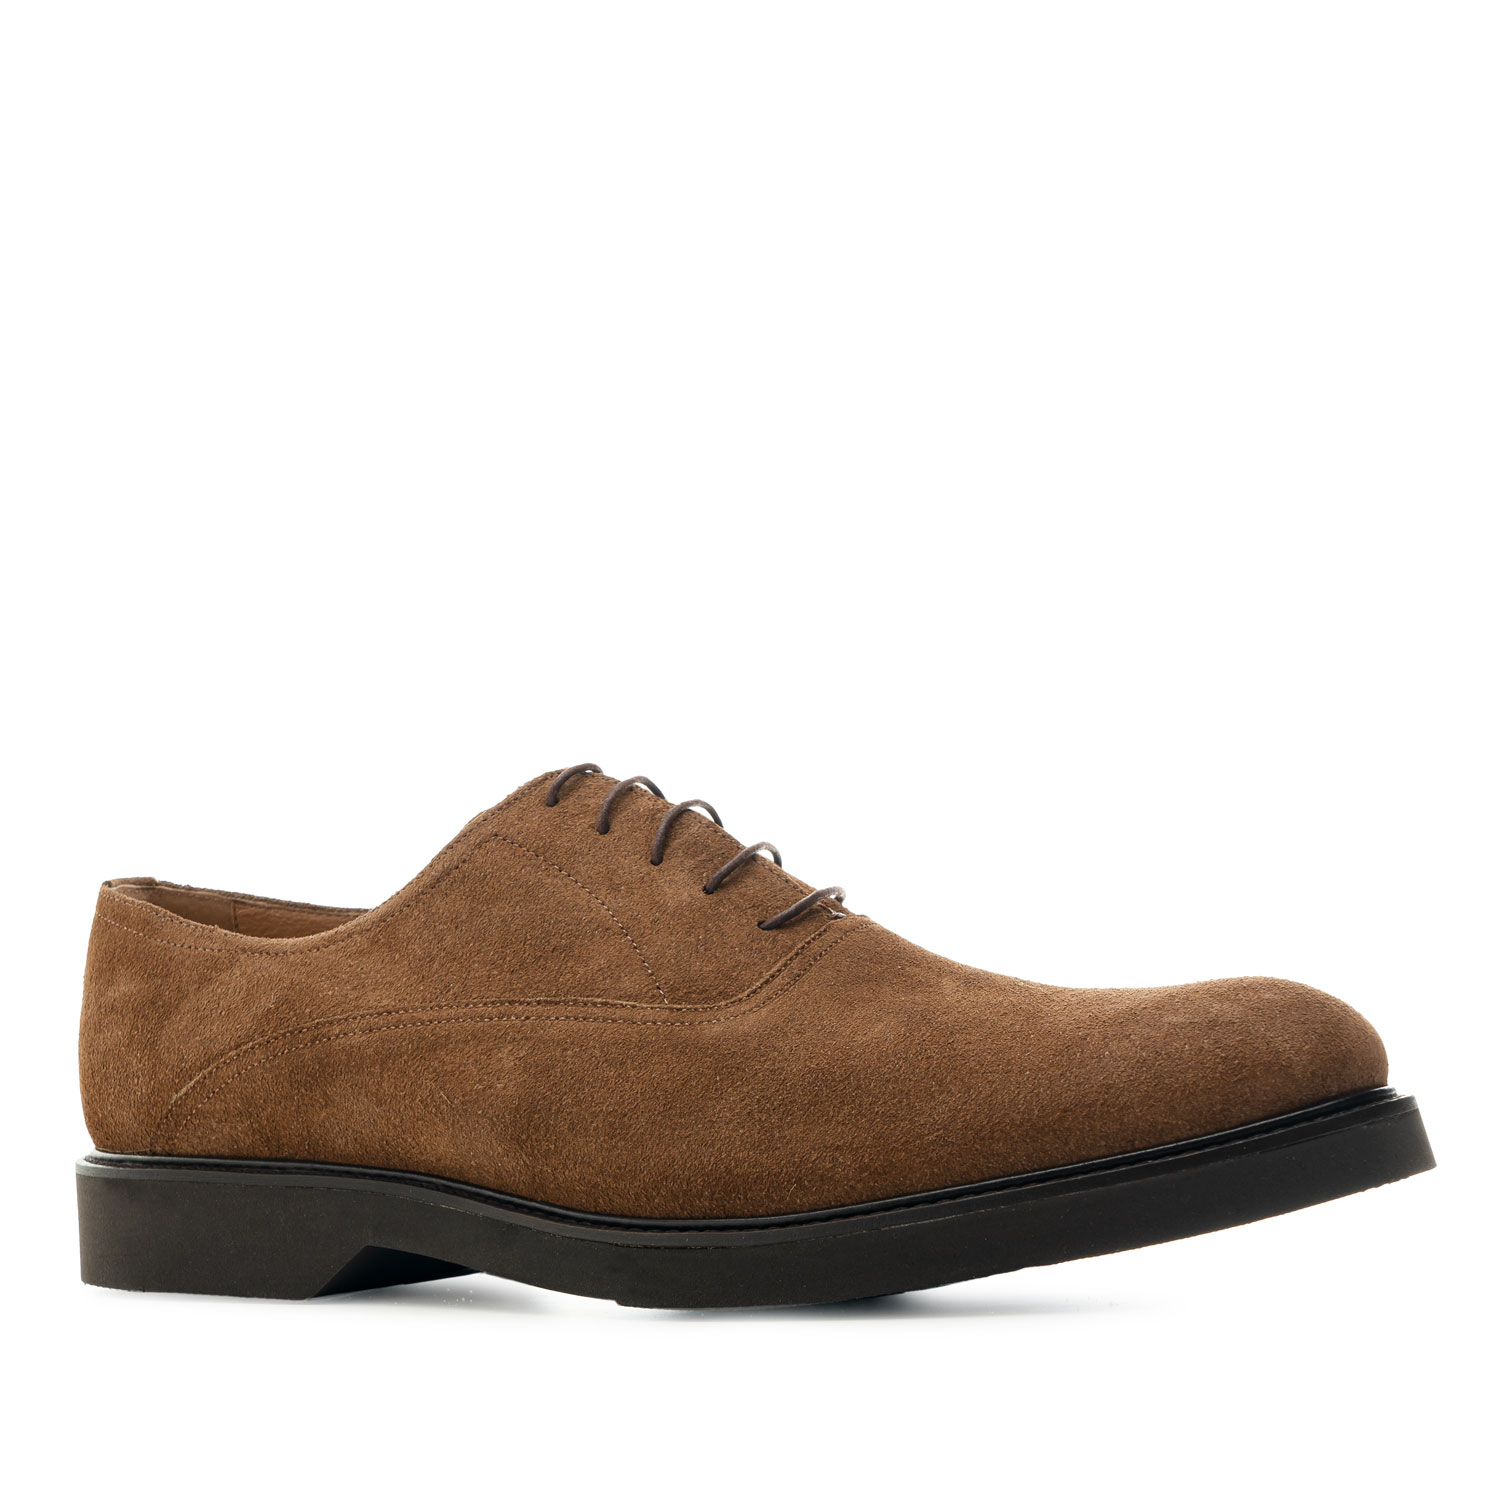 Dress Shoes for Men in Brown Split leather 